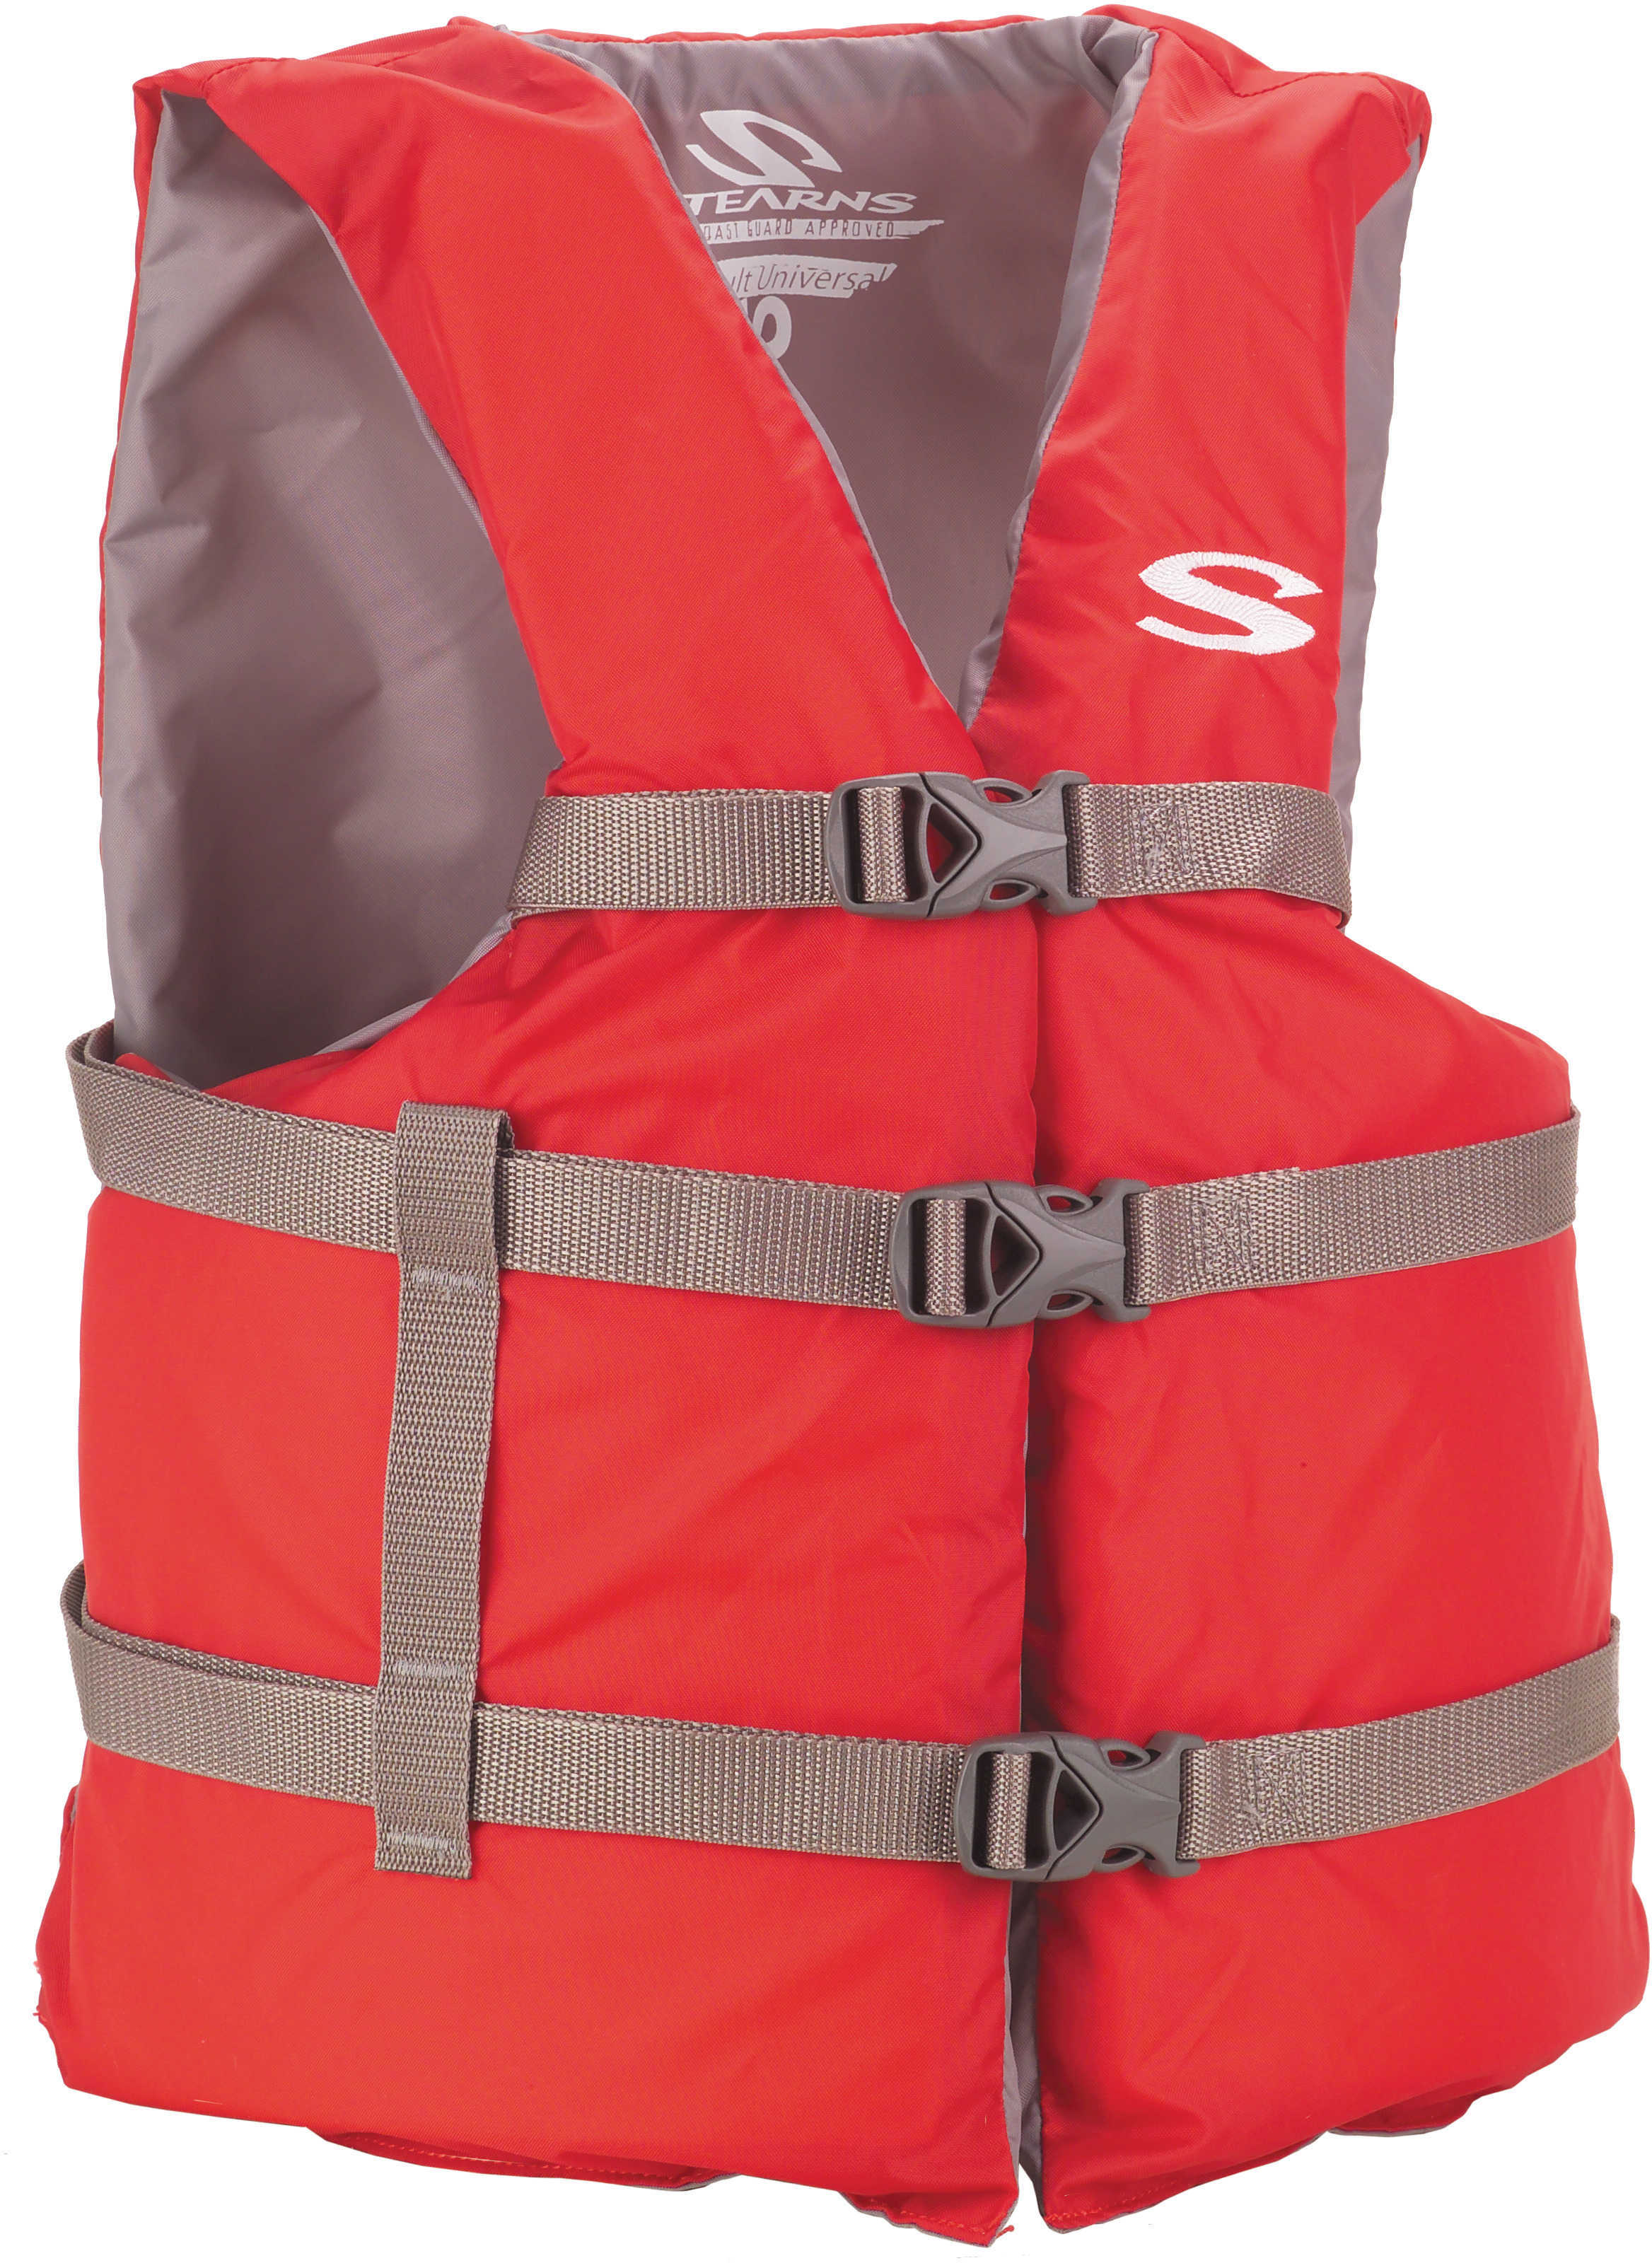 Stearns Adult Classic Boating PFD Red, Universal Md: 3000001412